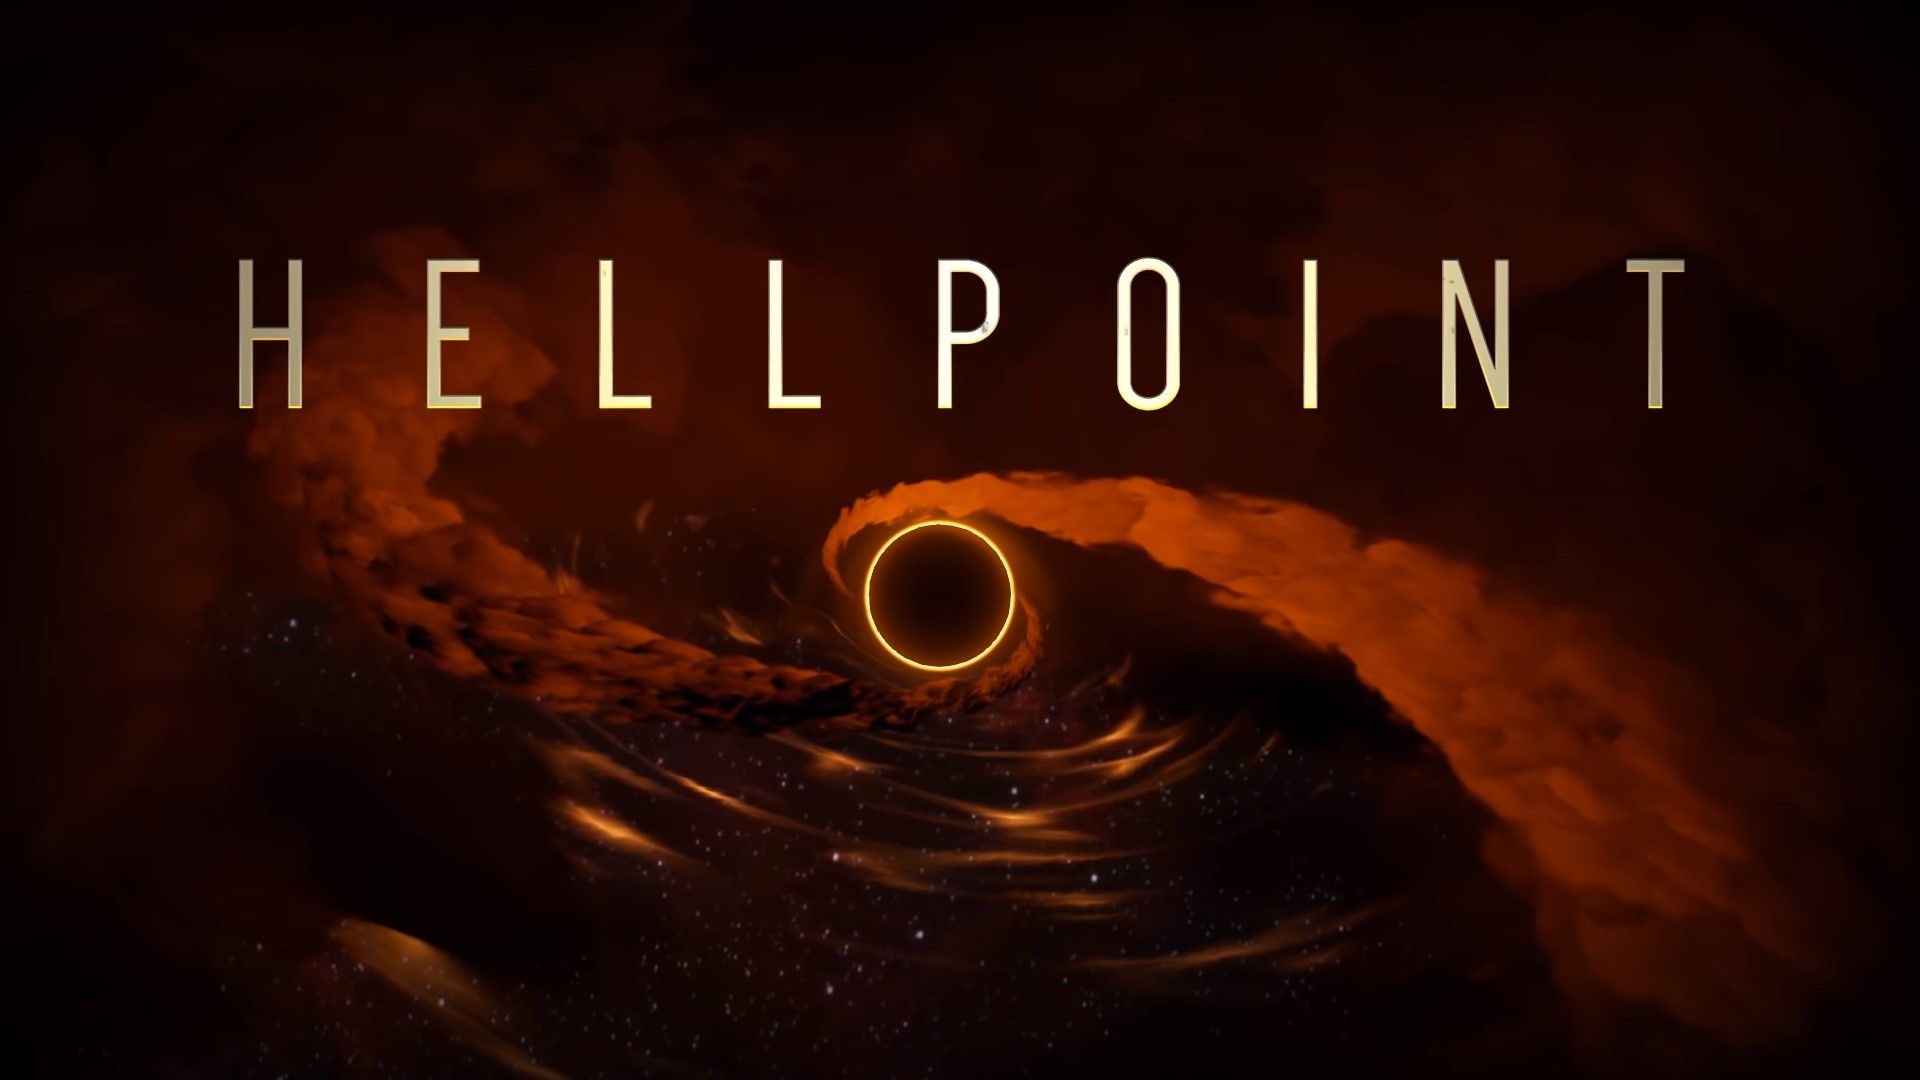 wp6838330 hellpoint wallpapers